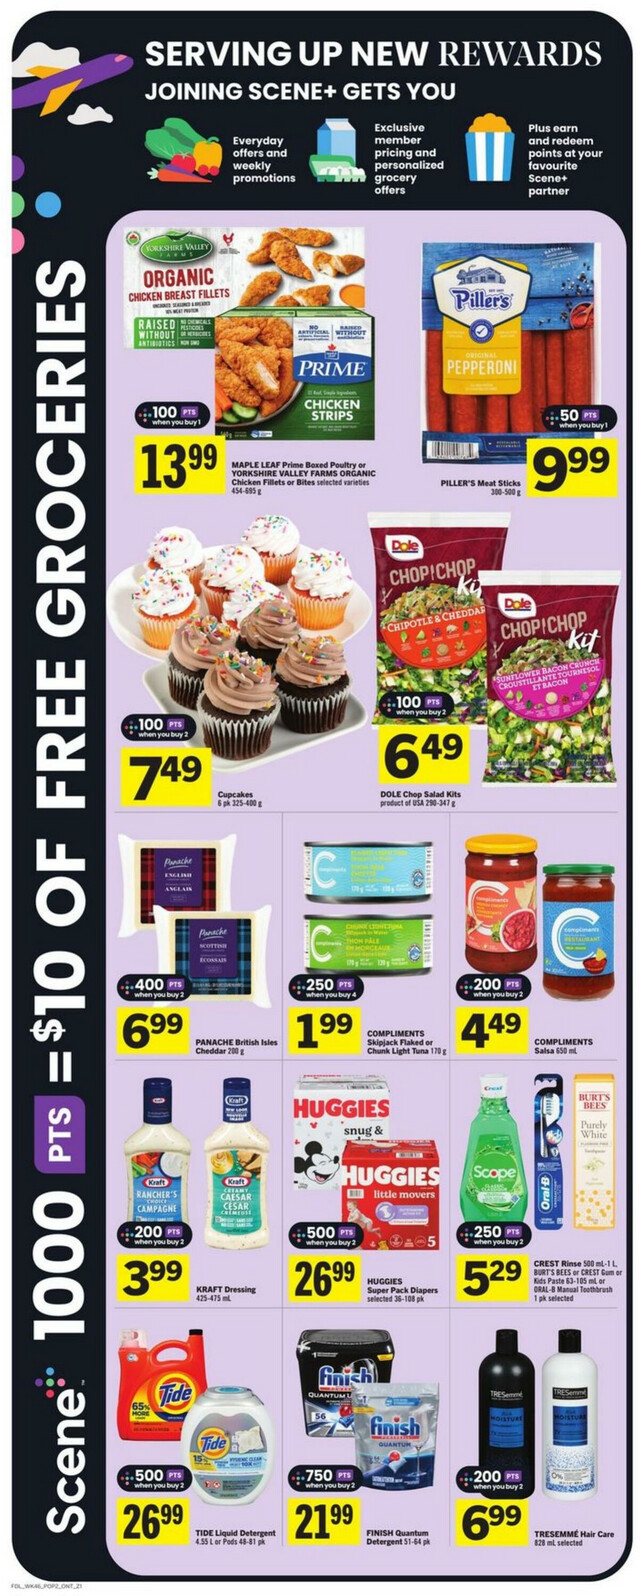 Foodland Flyer from 03/14/2024